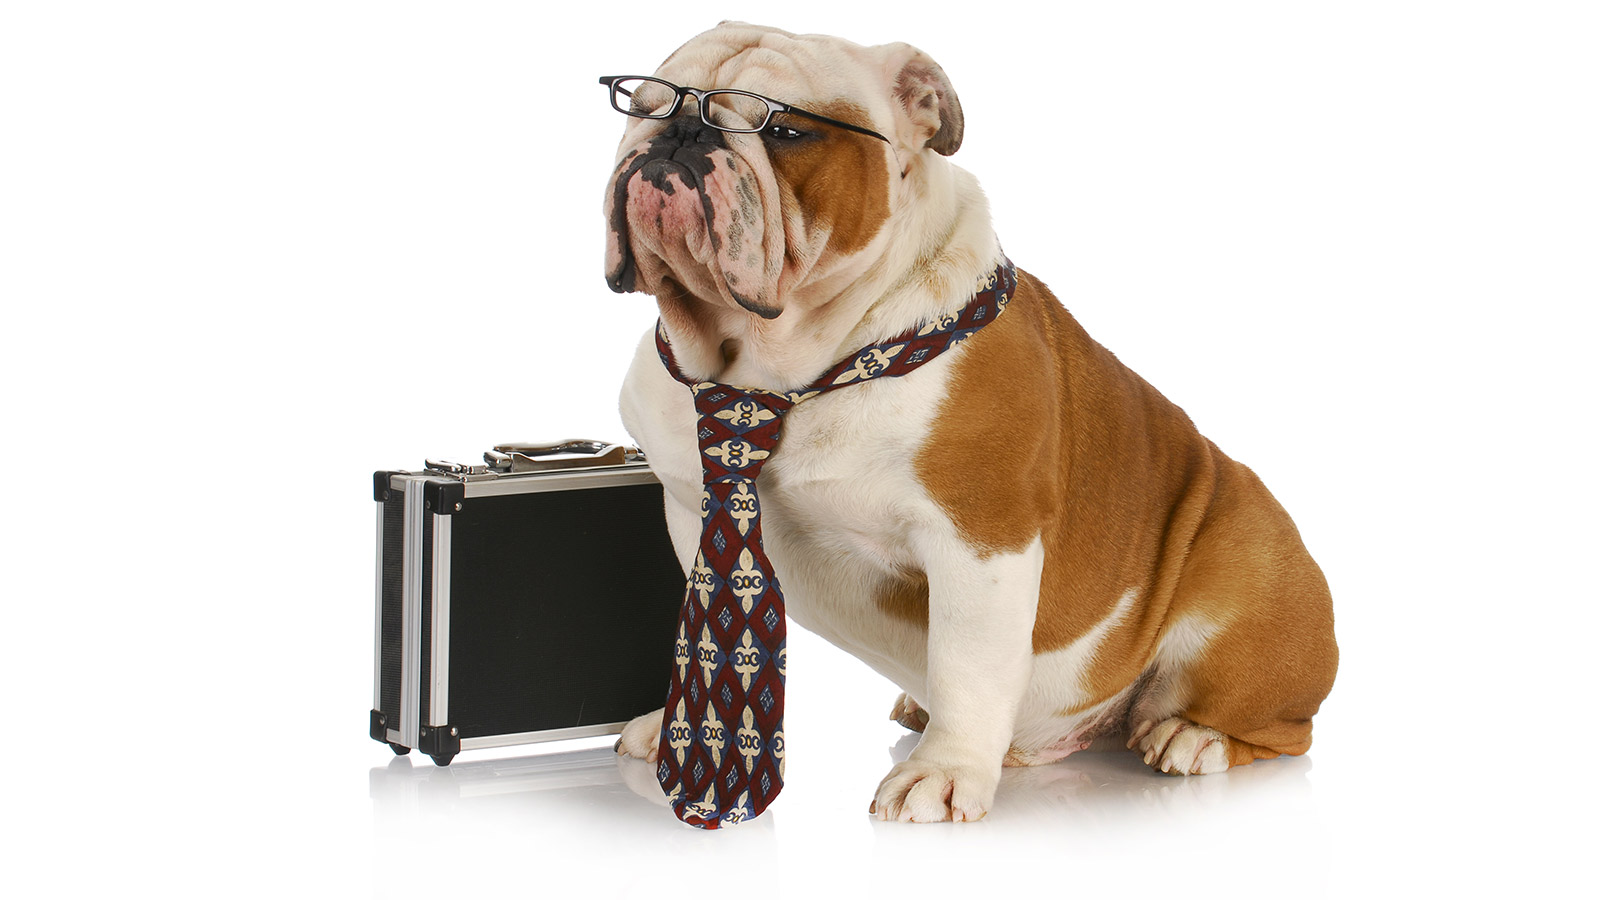 Dog with briefcase and tie